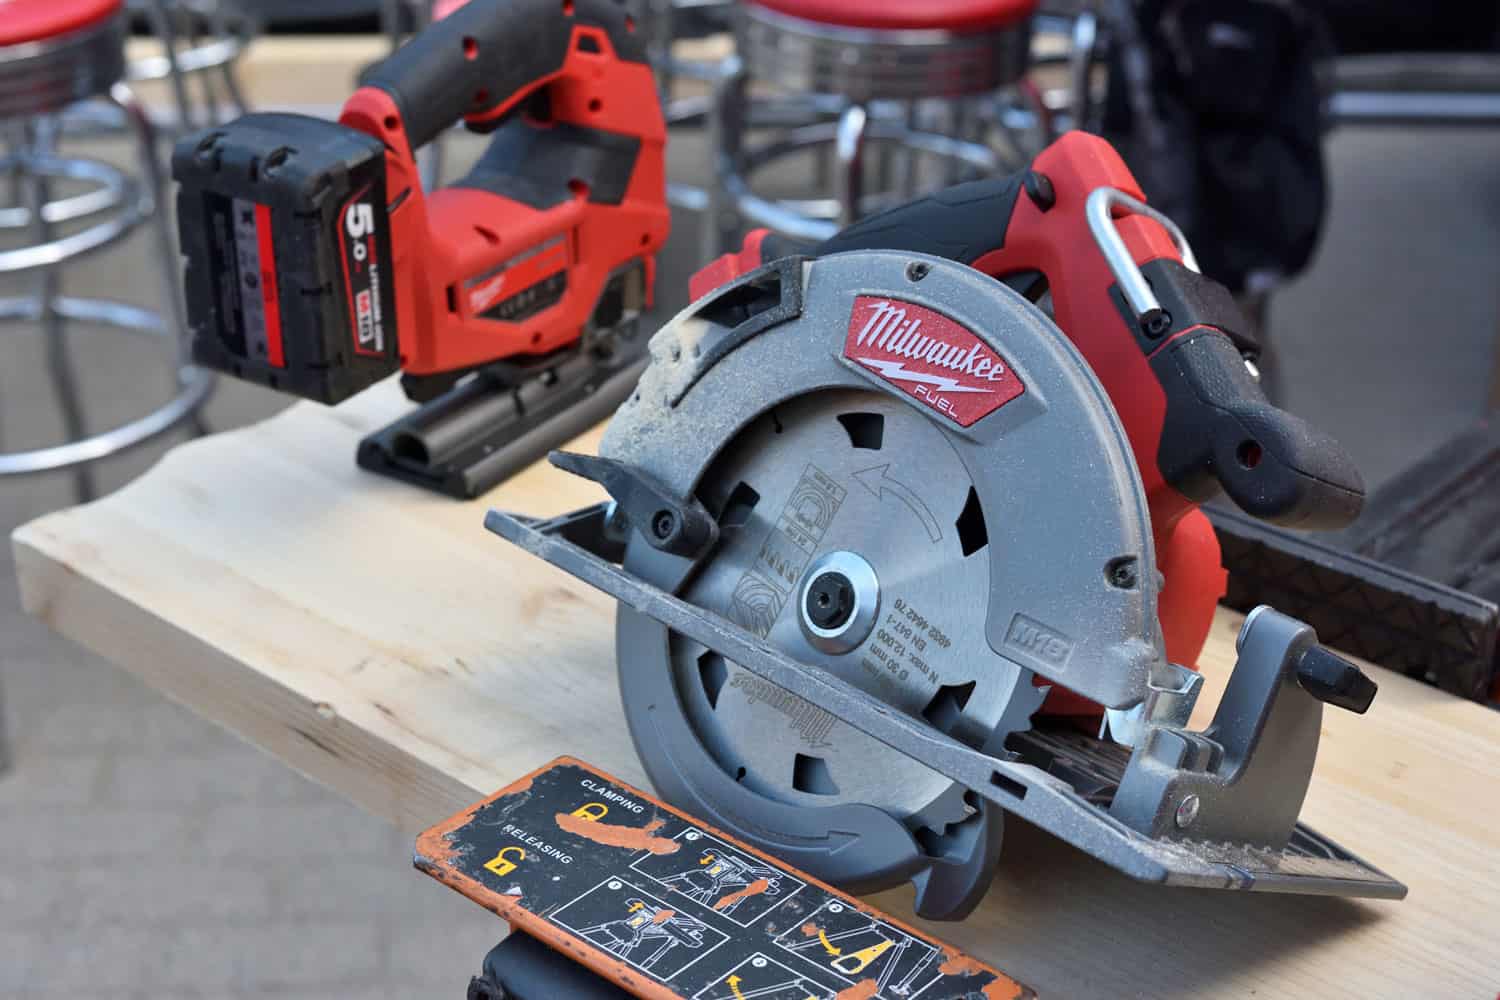 The Milwaukee Electric Tool Corporation produces power tools and hand tools 